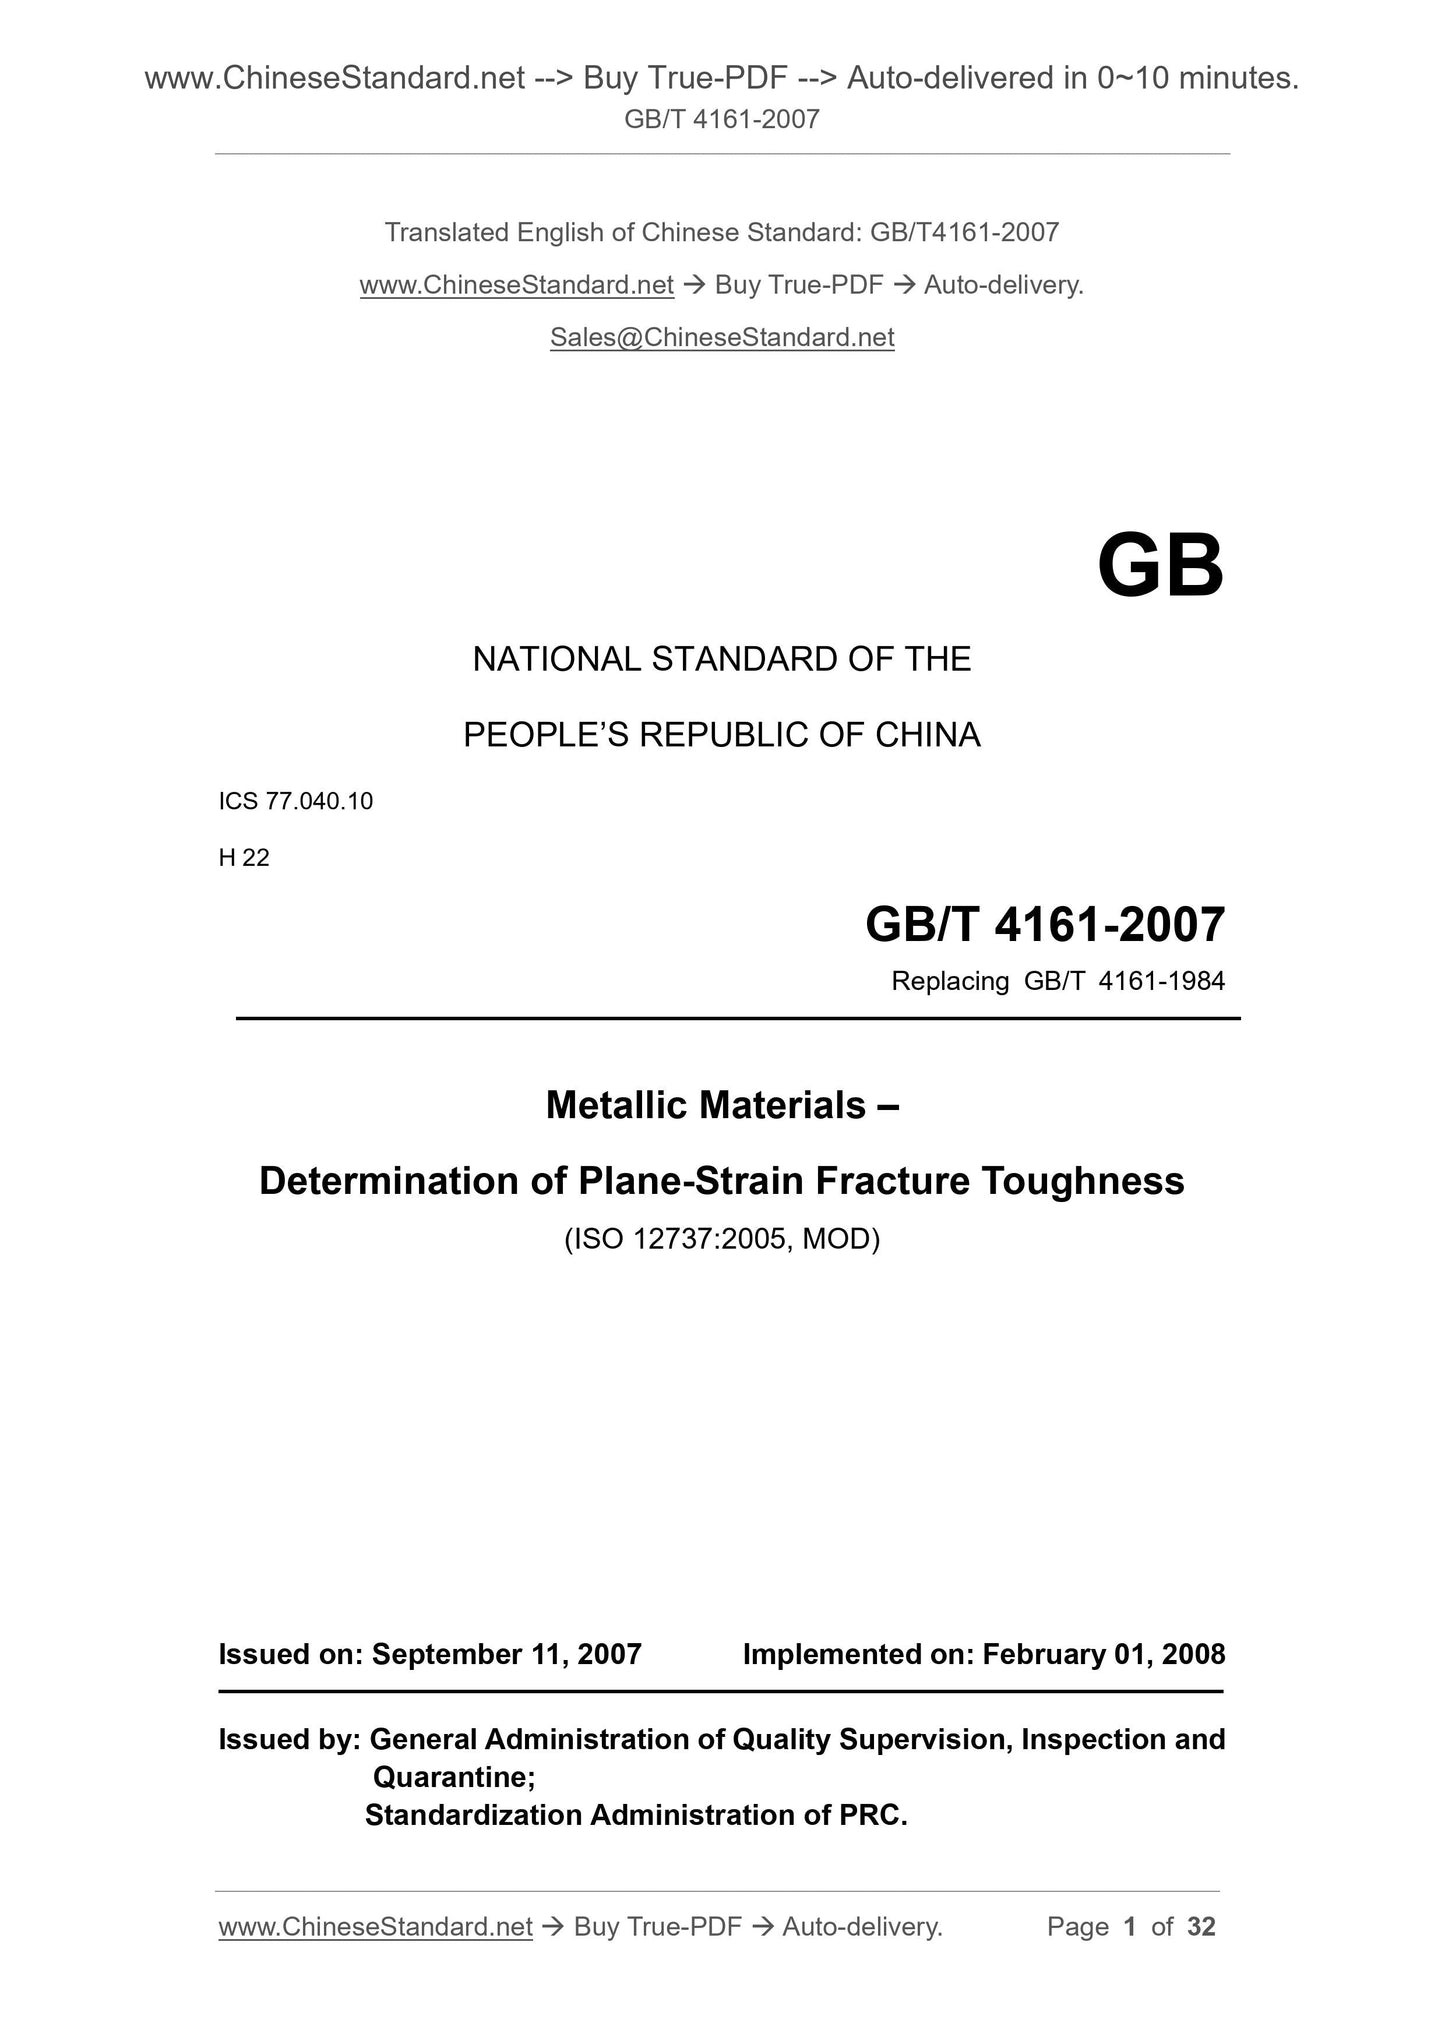 GB/T 4161-2007 Page 1